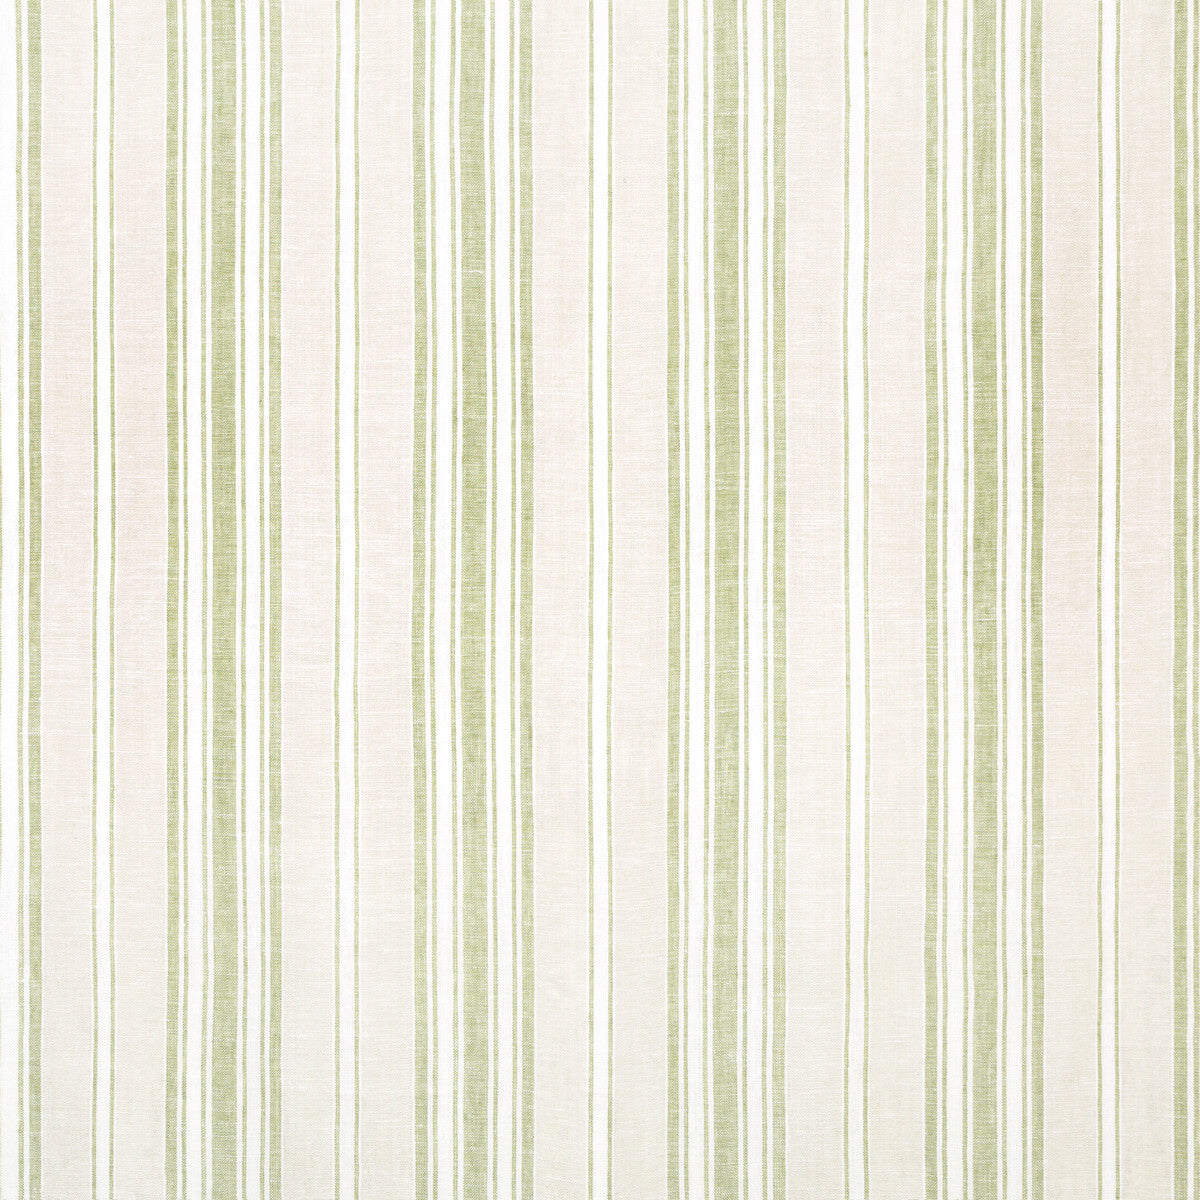 Laurel Stripe fabric in celadon color - pattern 2020189.123.0 - by Lee Jofa in the Avondale collection